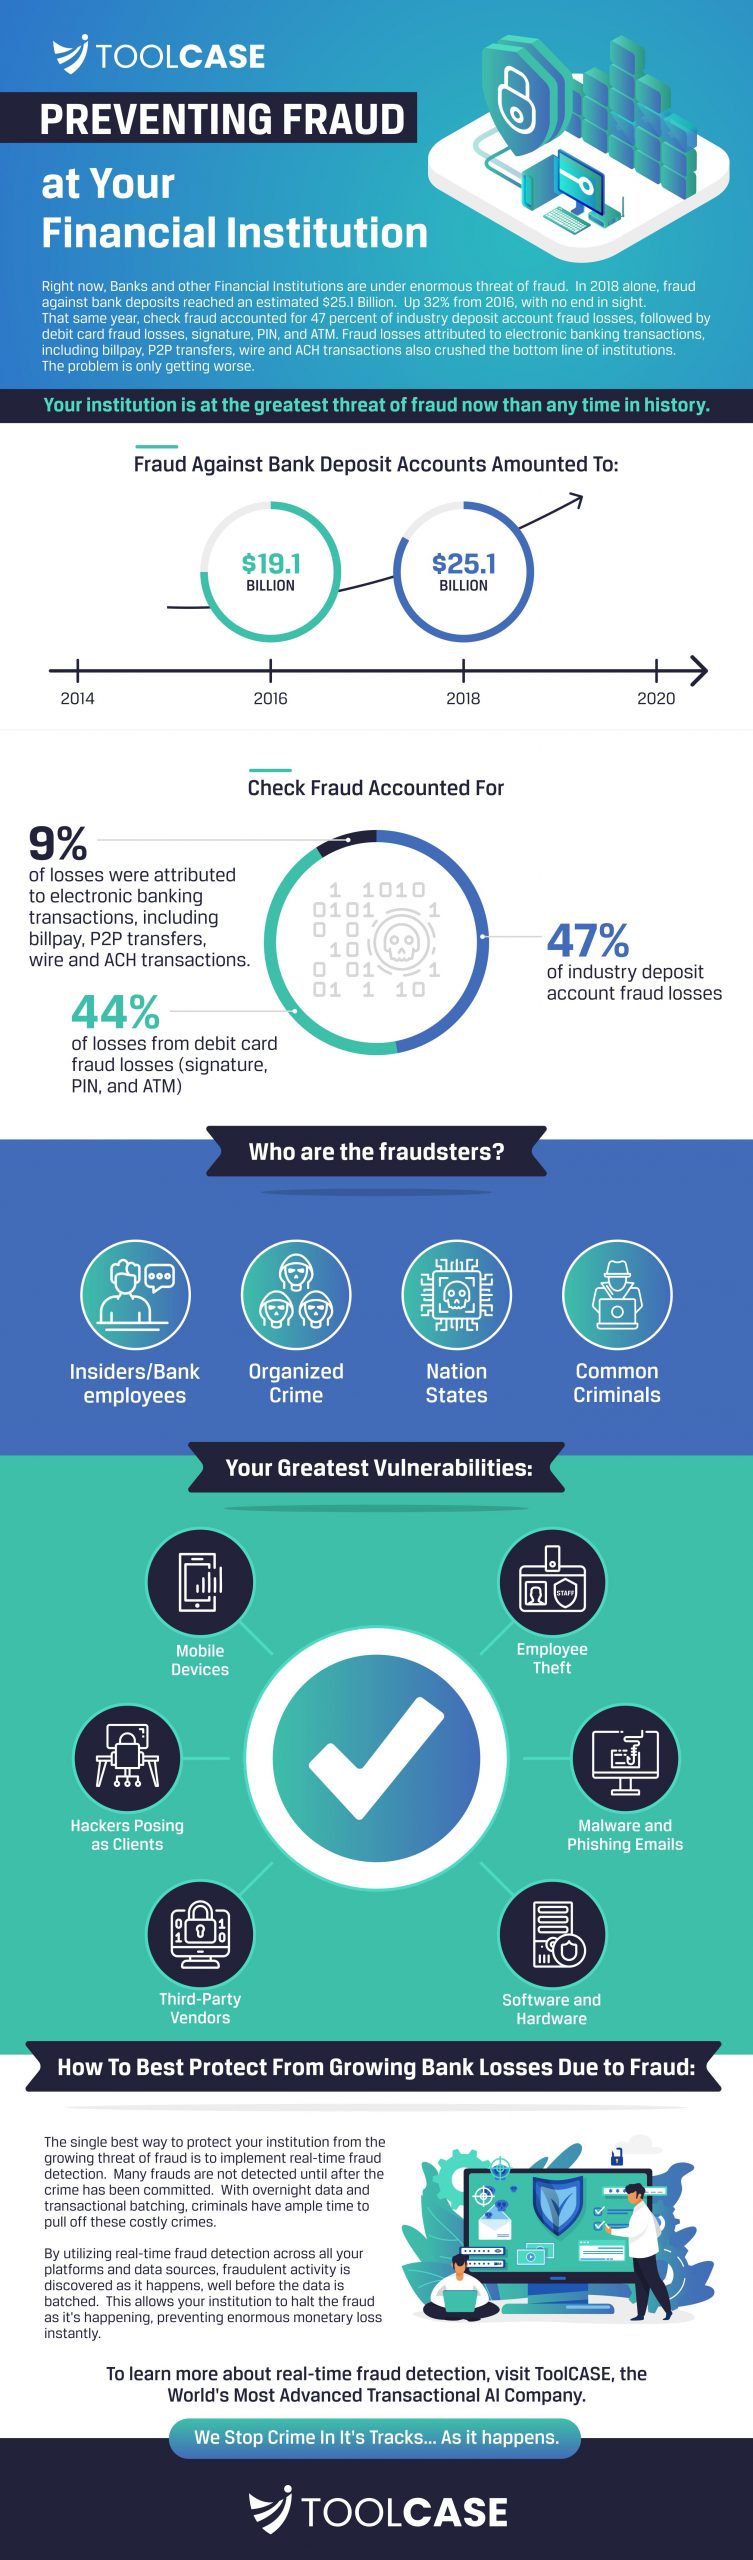 Preventing Fraud at Your Financial Institution